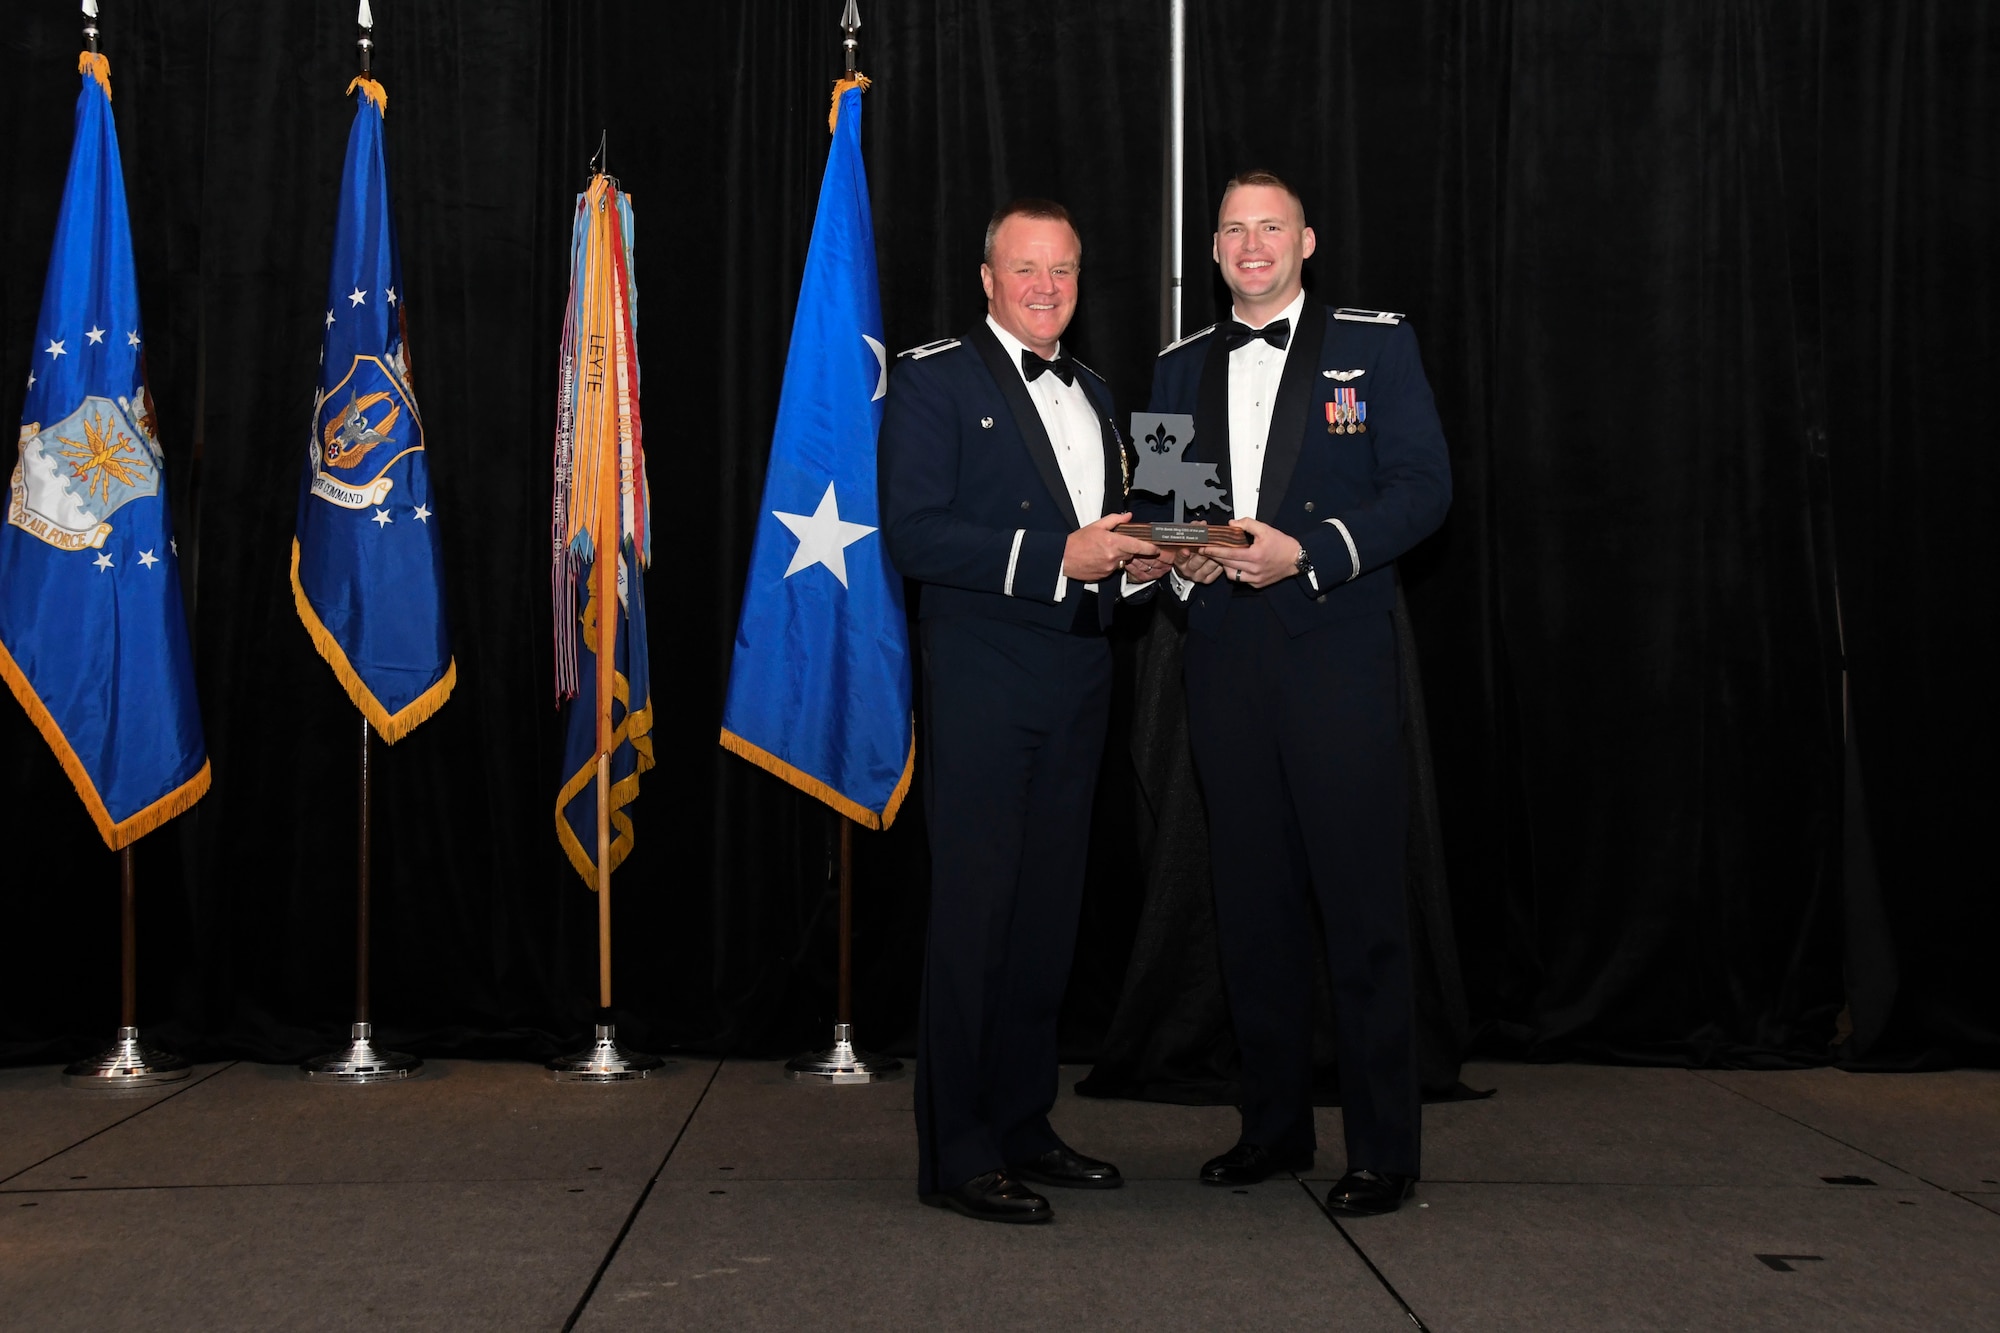 Col. Bruce R. Cox, 307th Bomb Wing commander, presents Capt. Edward Rowe, 343rd Bomb Squadron, the 307th Bomb Wing’s Company Grade Officer of the Year award for 2016. The award was presented during the 307th Bomb Wing’s 75th Anniversary and Awards Gala at the Shreveport Convention Center April 1, 2017. (U.S. Air Force photo by Staff Sgt. Callie Ware/Released)